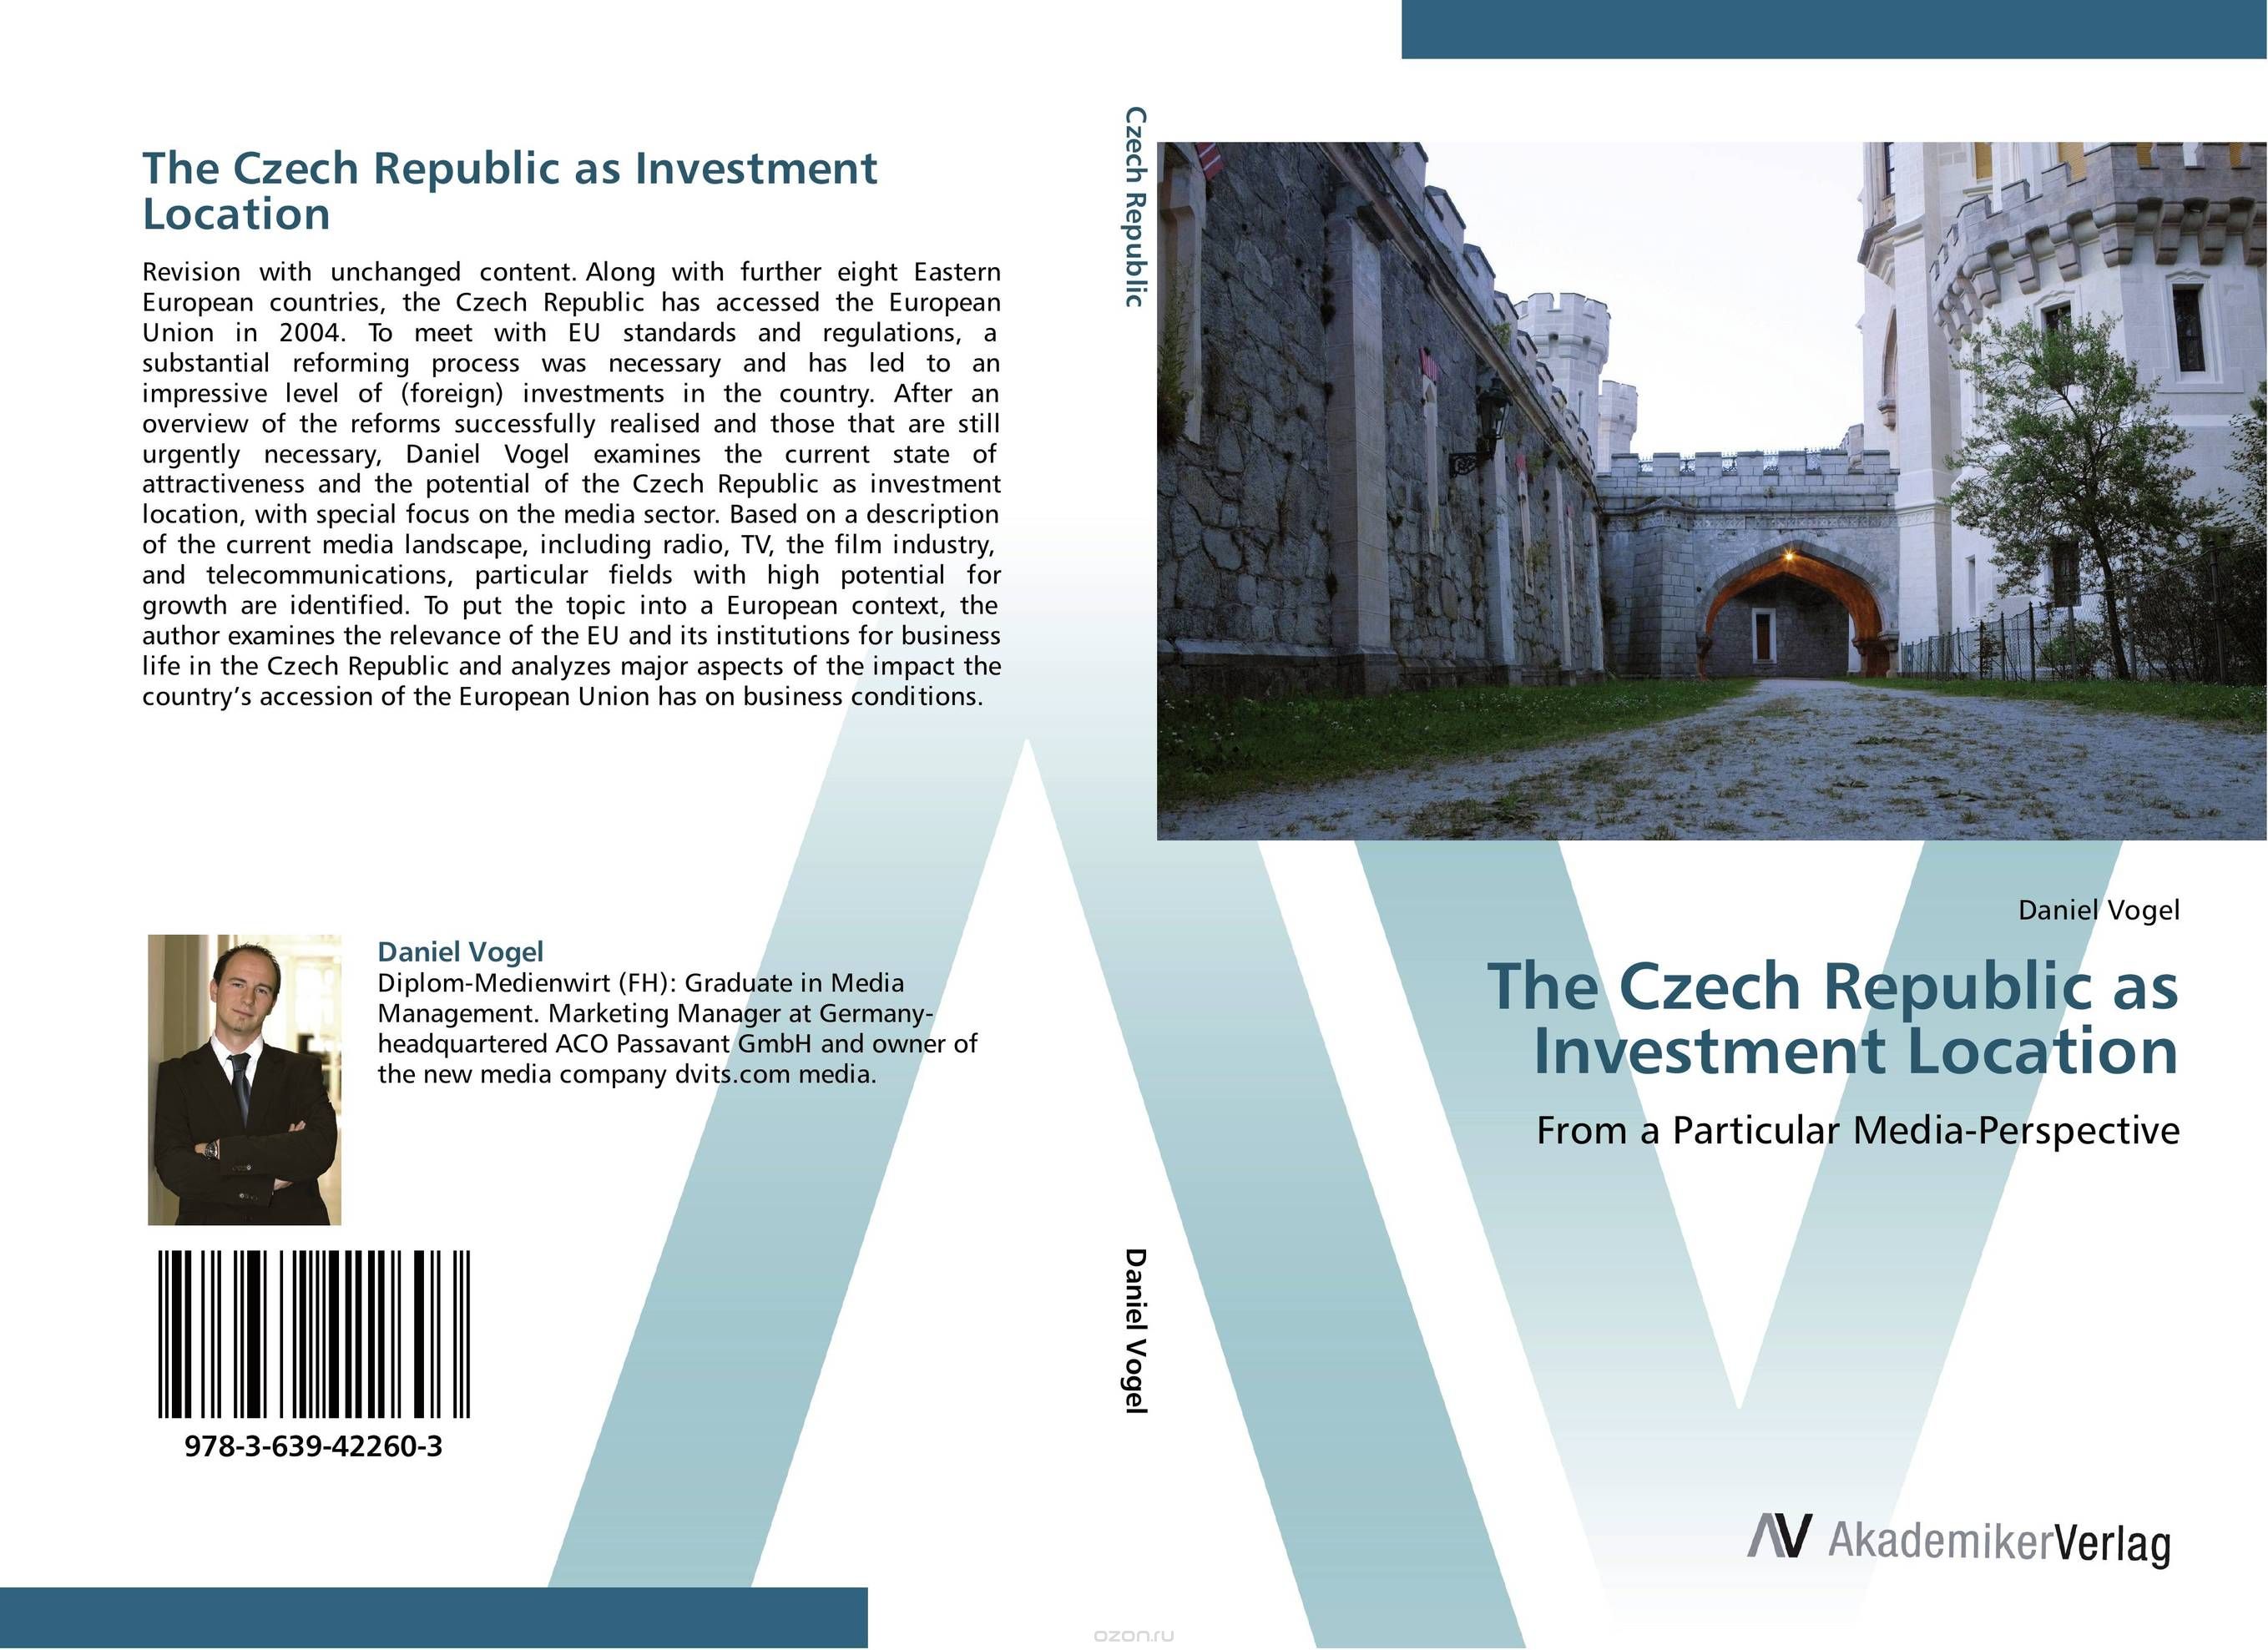 The Czech Republic as Investment Location